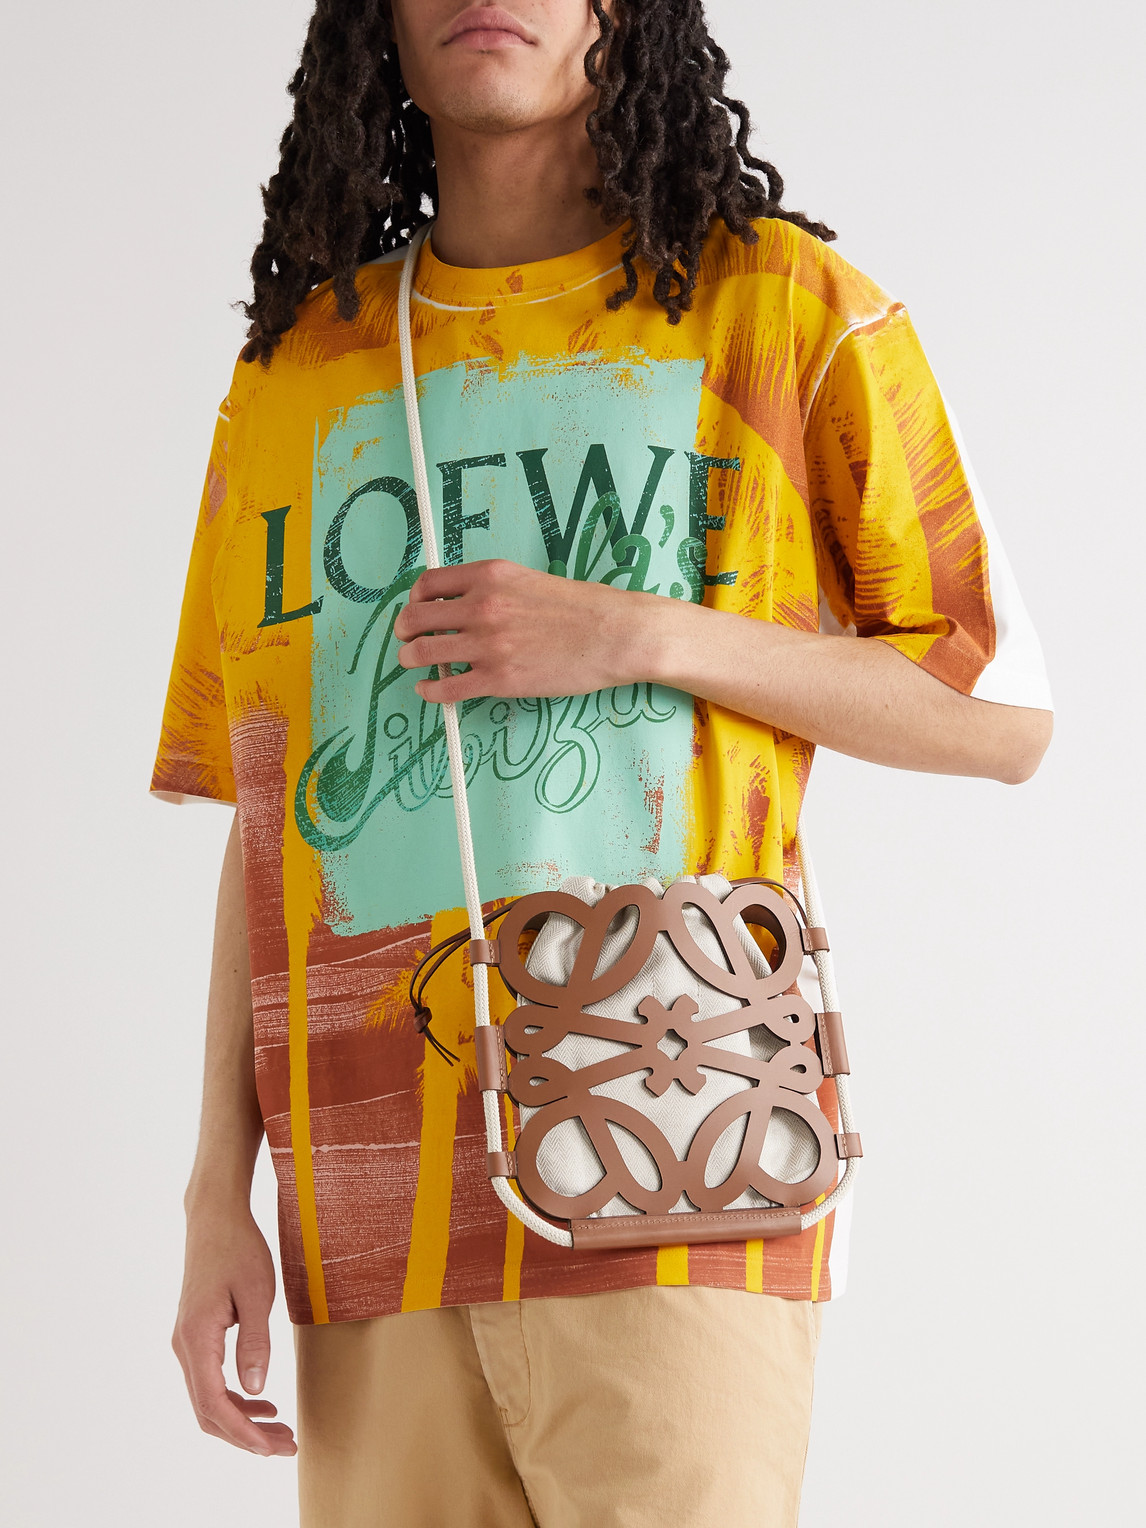 Loewe Puzzle Bag Archives - The Blonde & The Brunette